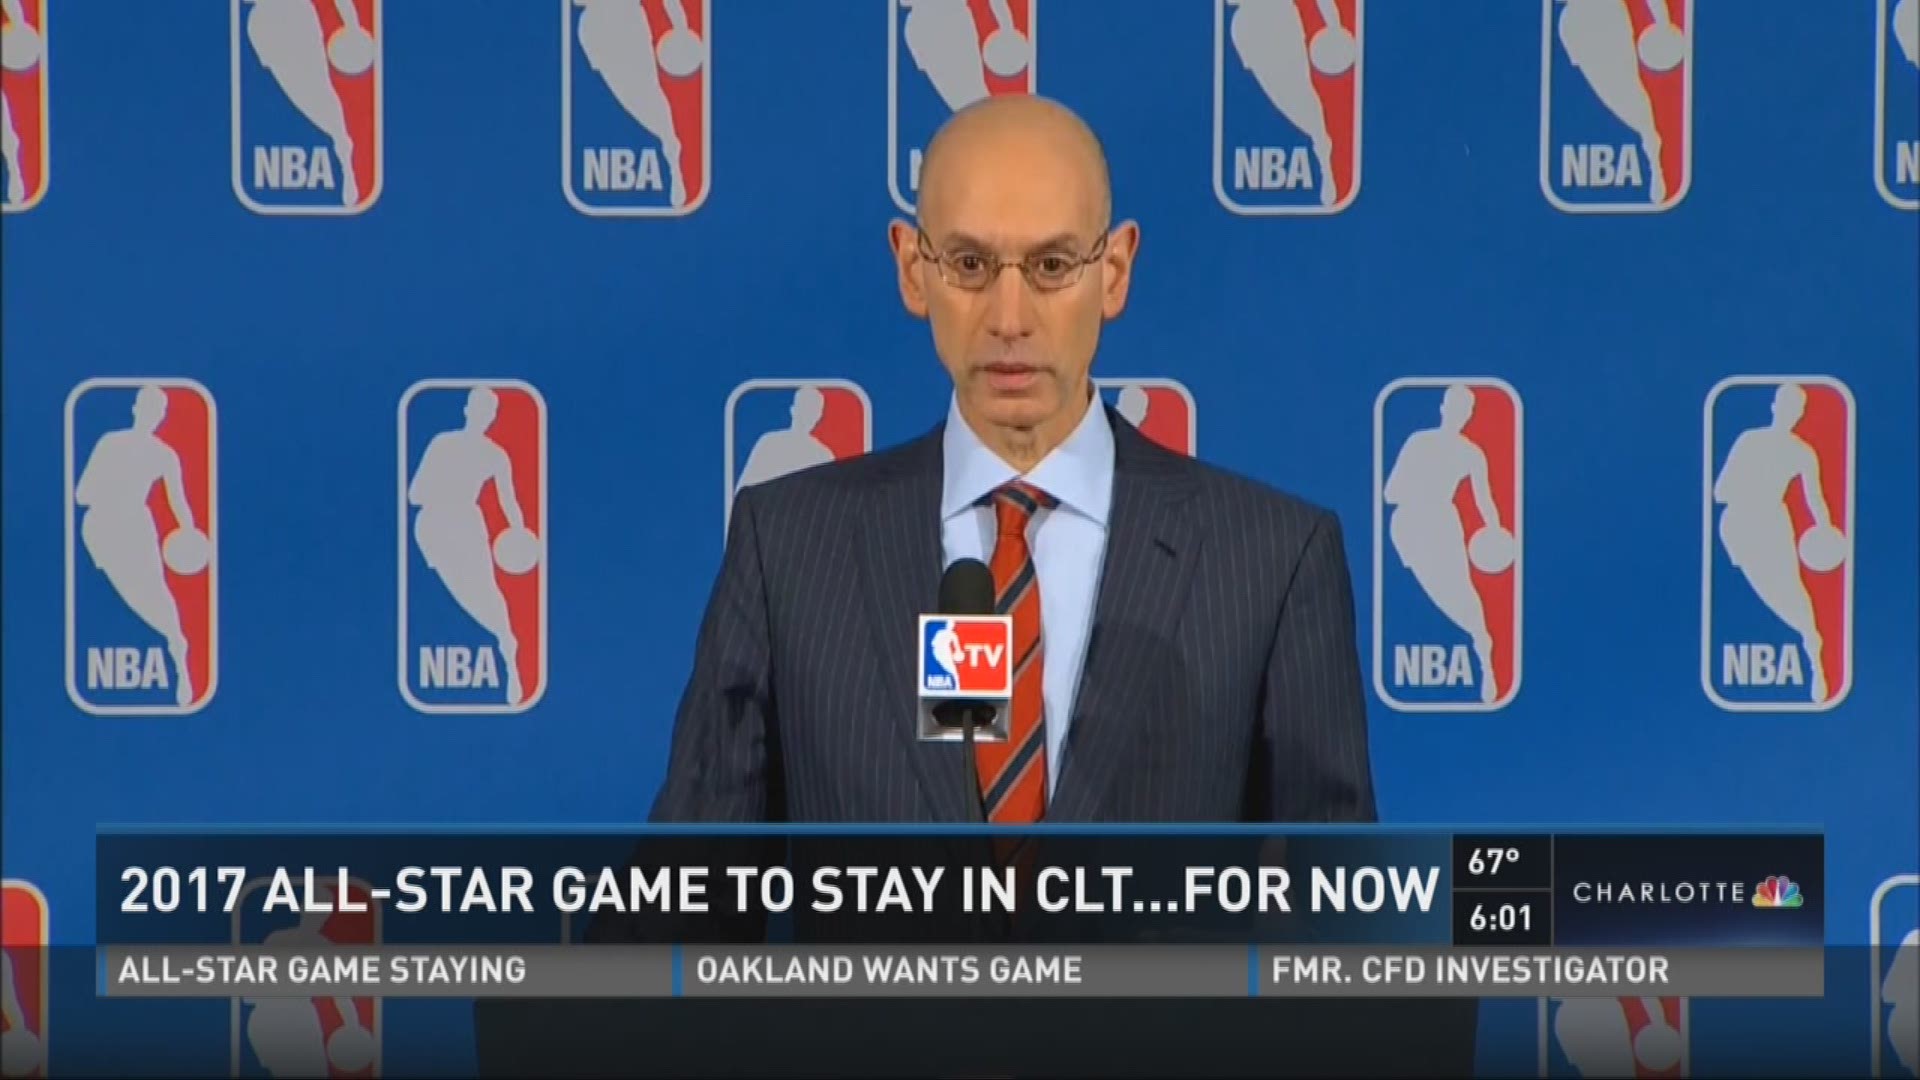 NBA Commissioner Adam Silver said there was no discussion of moving the 2017 All-Star Game from Charlotte, but the league clarified that a decision has not been made.